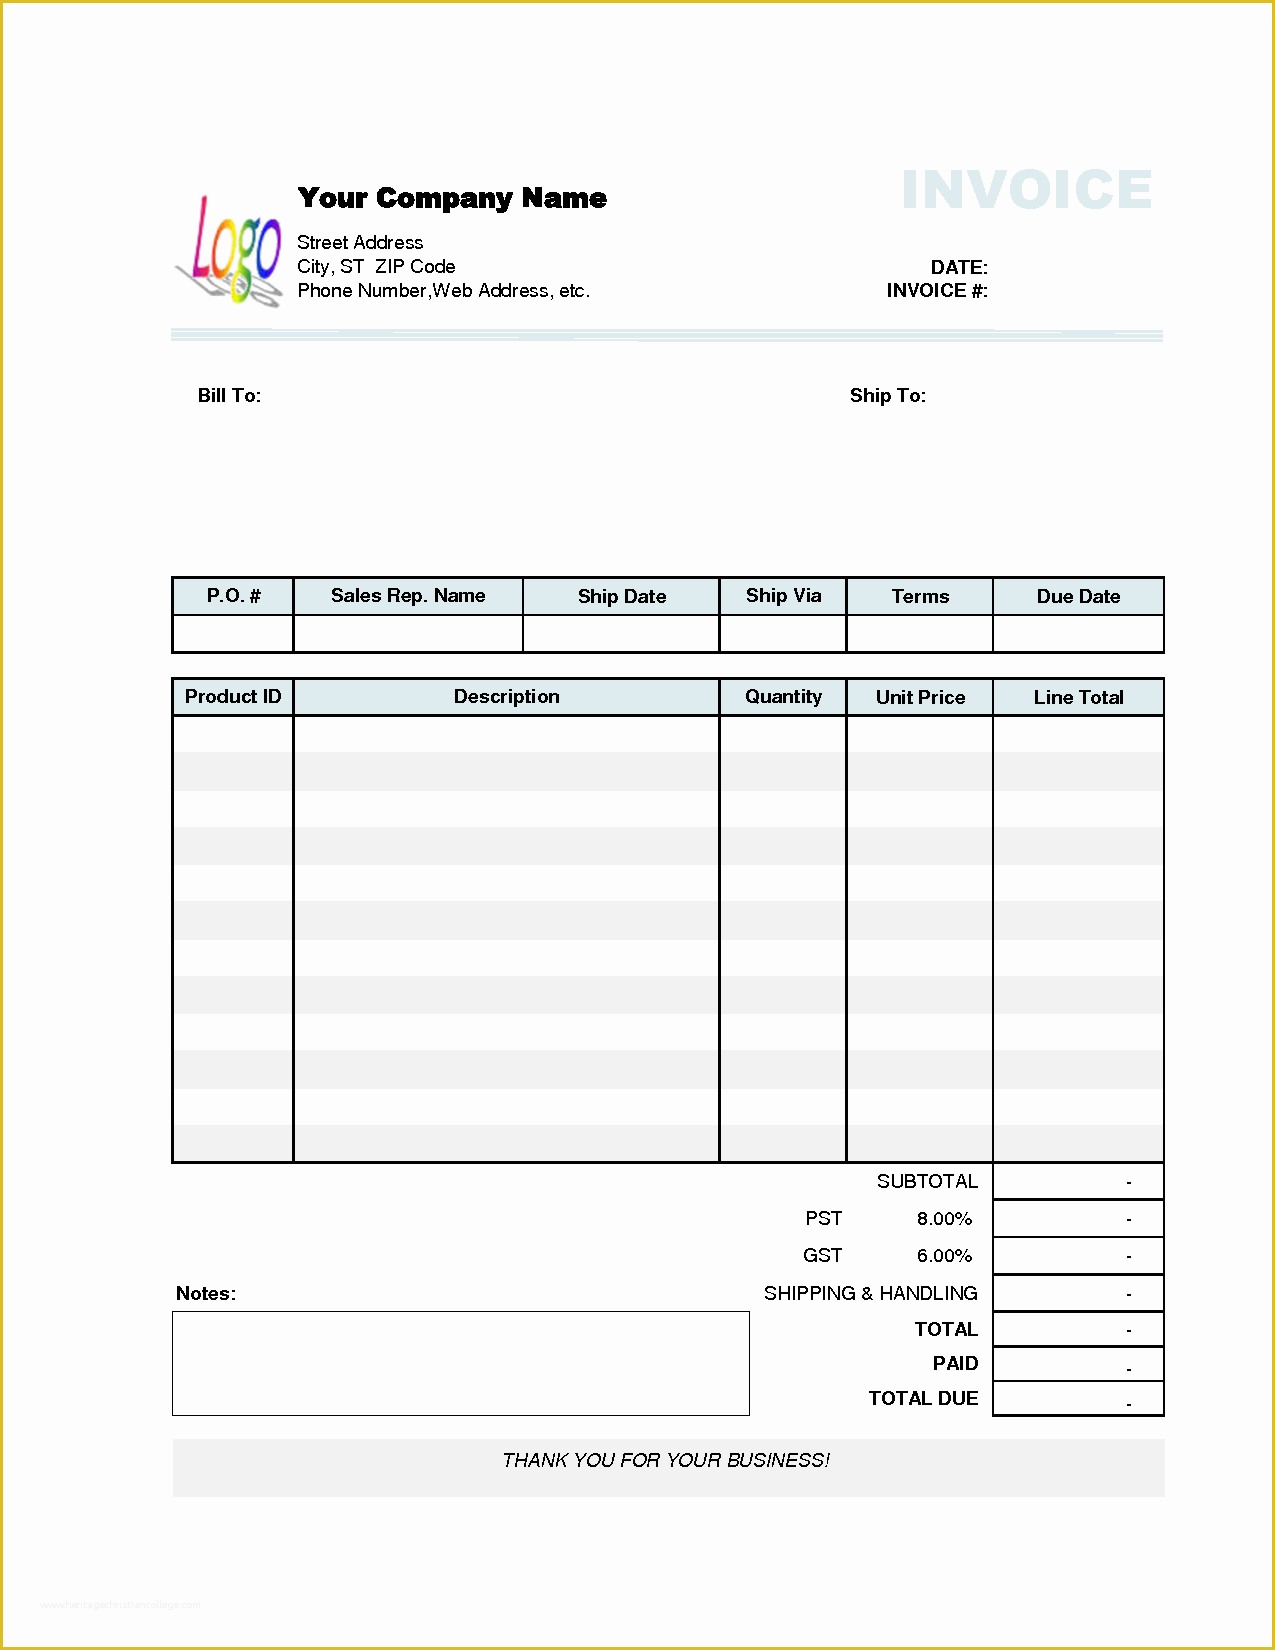 filled invoice sample